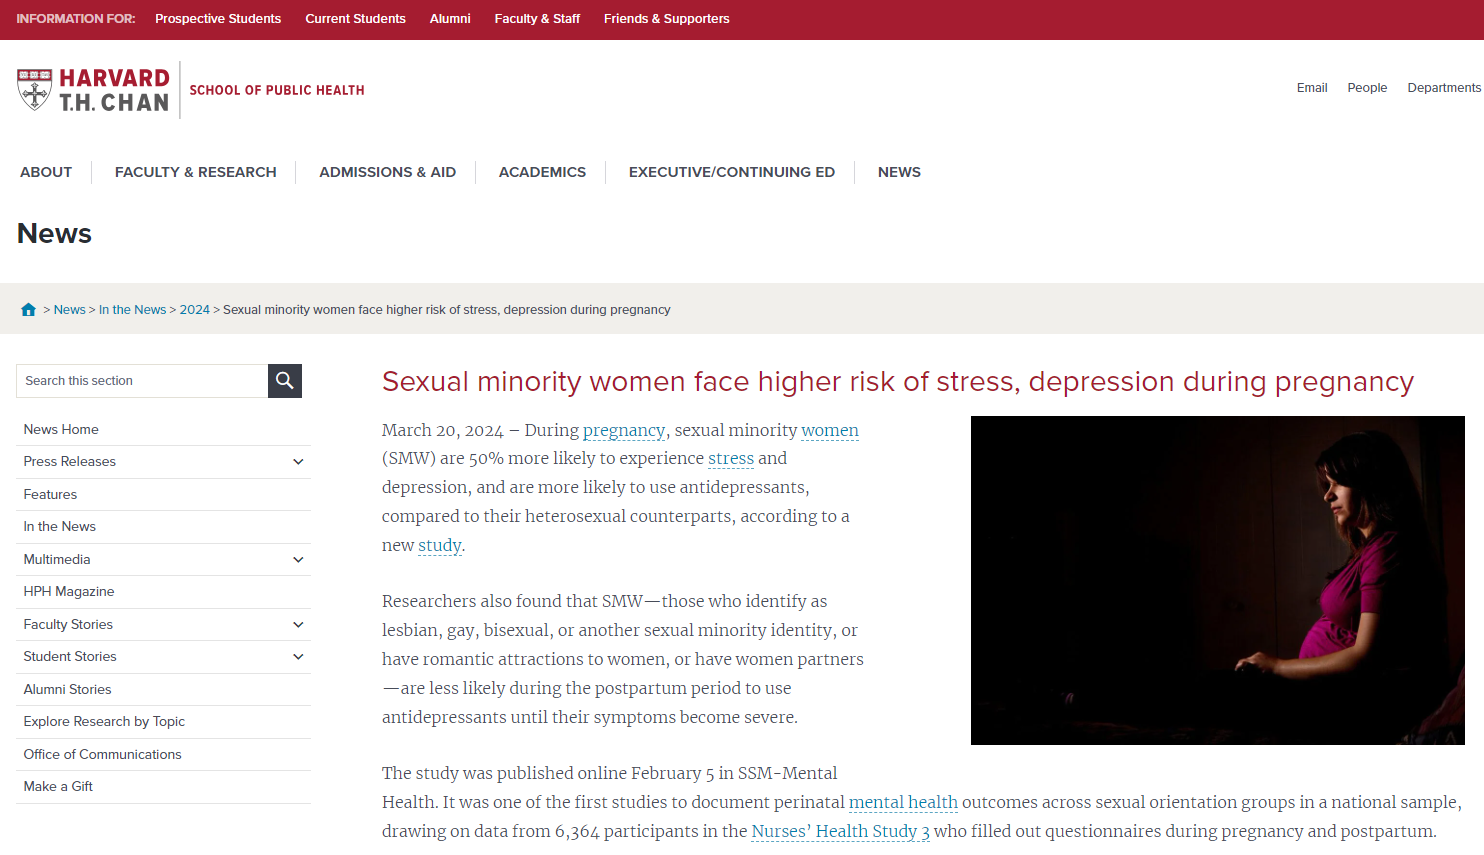 Press Release_HSPH_Sexual minority women face higher risk of stress, depression during pregnancy.PNG